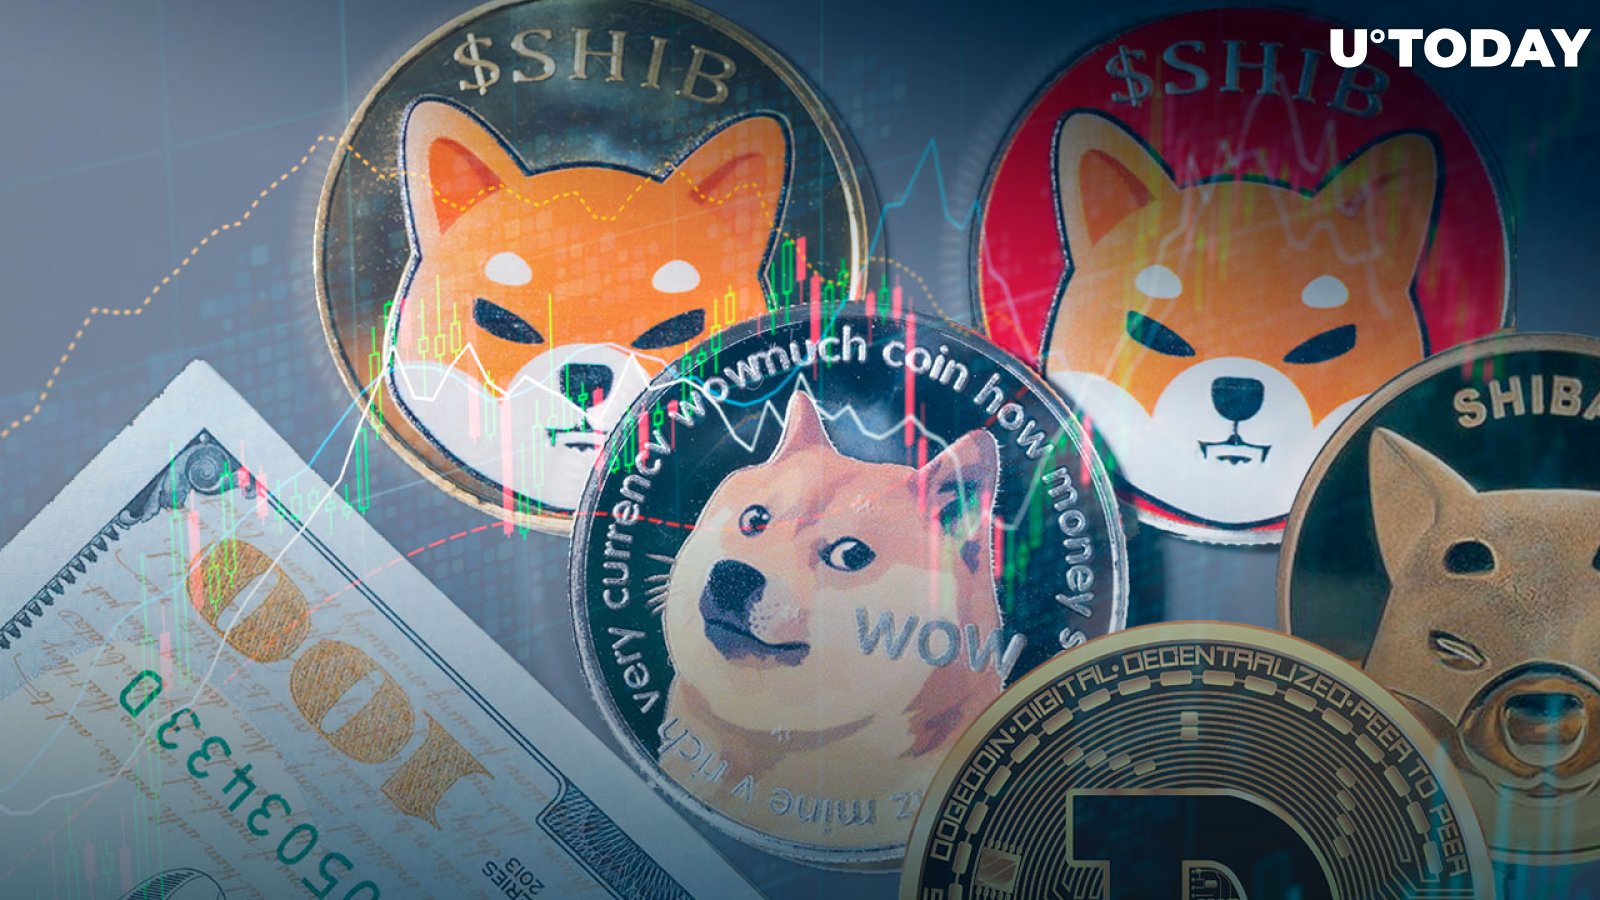 Dogecoin and Shiba Inu Remain Among Most Popular Cryptocurrencies in U.S.